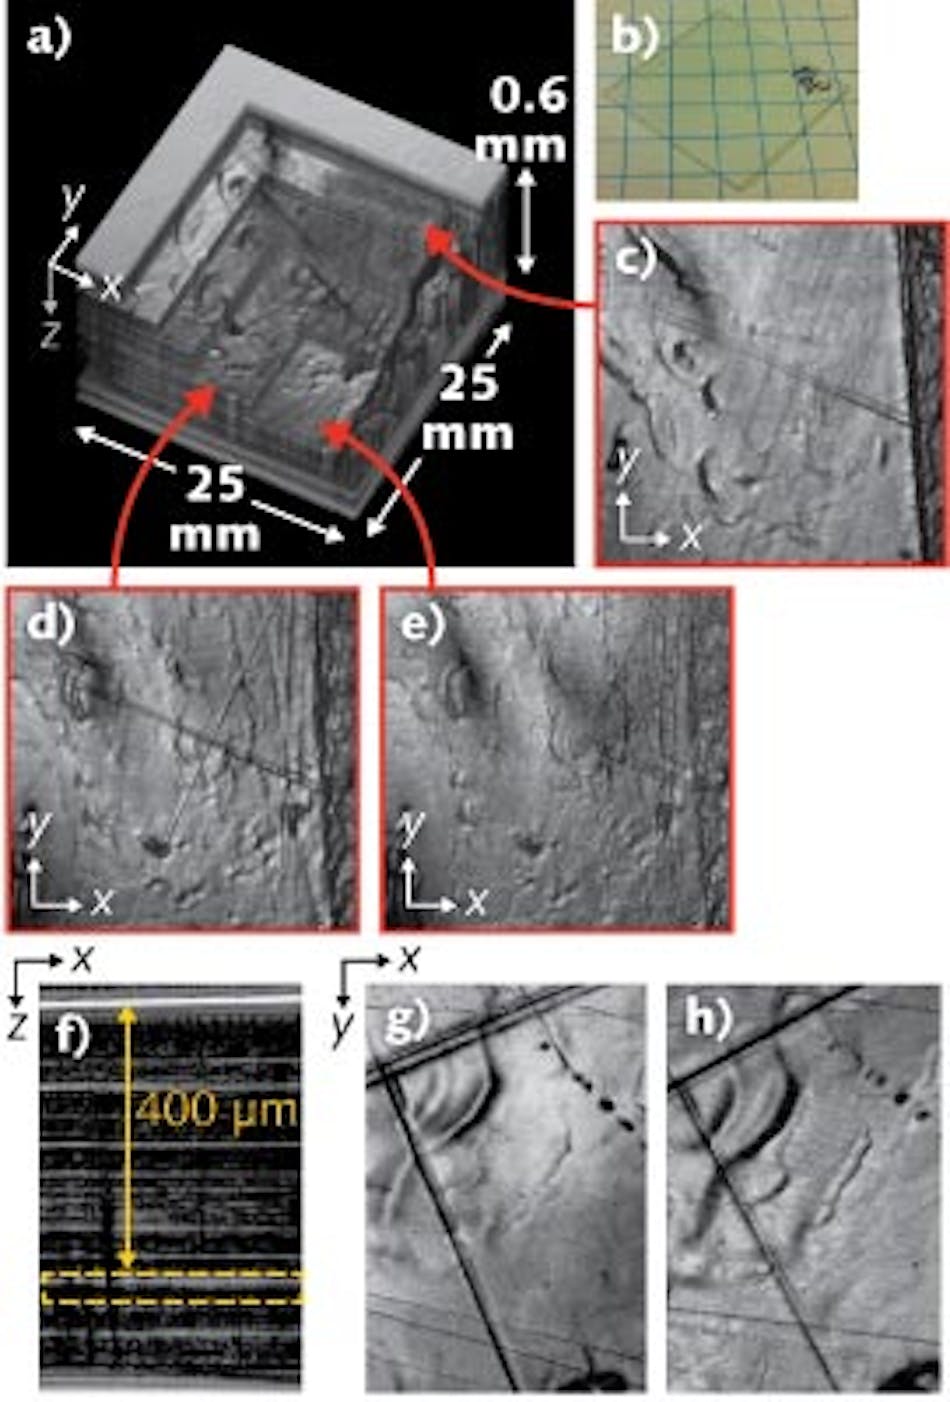 The internal structure of a thermopressed GRIN sheet is imaged in 3D via swept-source Fourier-domain OCT (SS-OCT) (a). The sheet is also shown in a photo (b). Slices of the OCT data at different depths show internal structure (c through e). The yellow dotted line in a 2D cross-section through the sheet highlights a particular polymer layer; the topography of this layer is revealed in two OCT renderings of the layer, one imaged from the top of the sheet (g) and the other from the bottom (h).